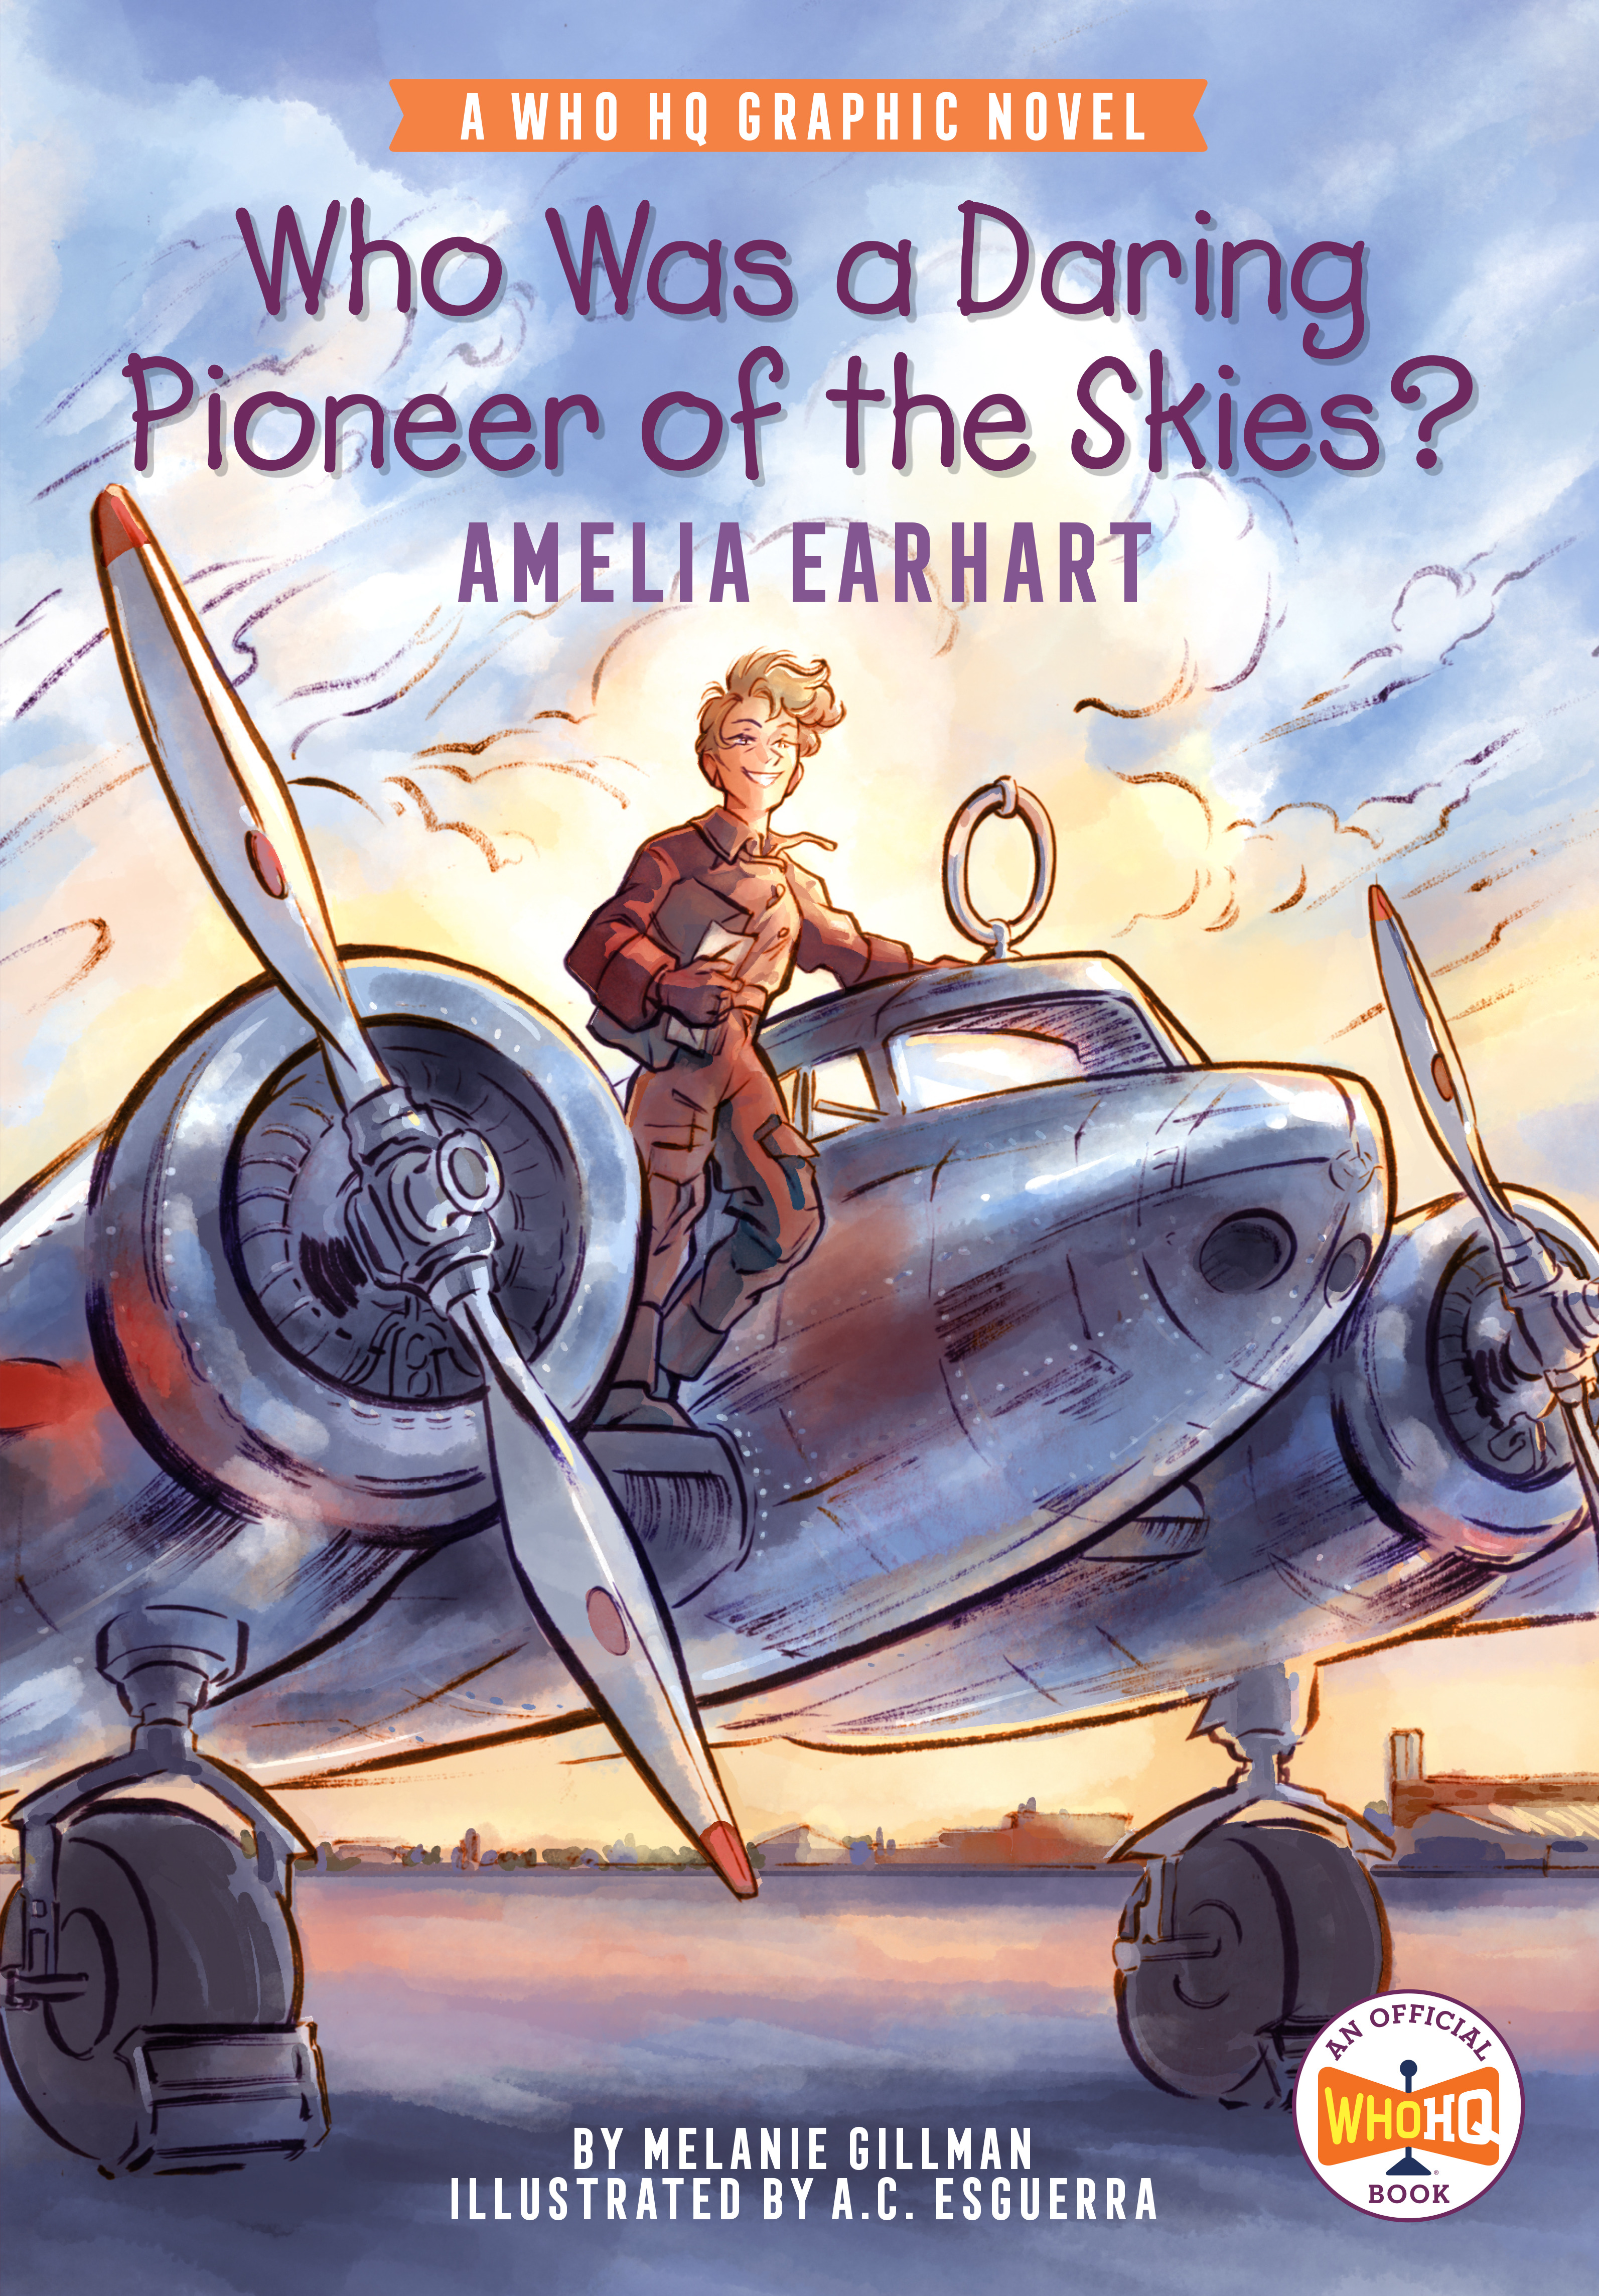 A Who HQ Graphic Novel - Who Was a Daring Pioneer of the Skies?: Amelia Earhart | Documentary